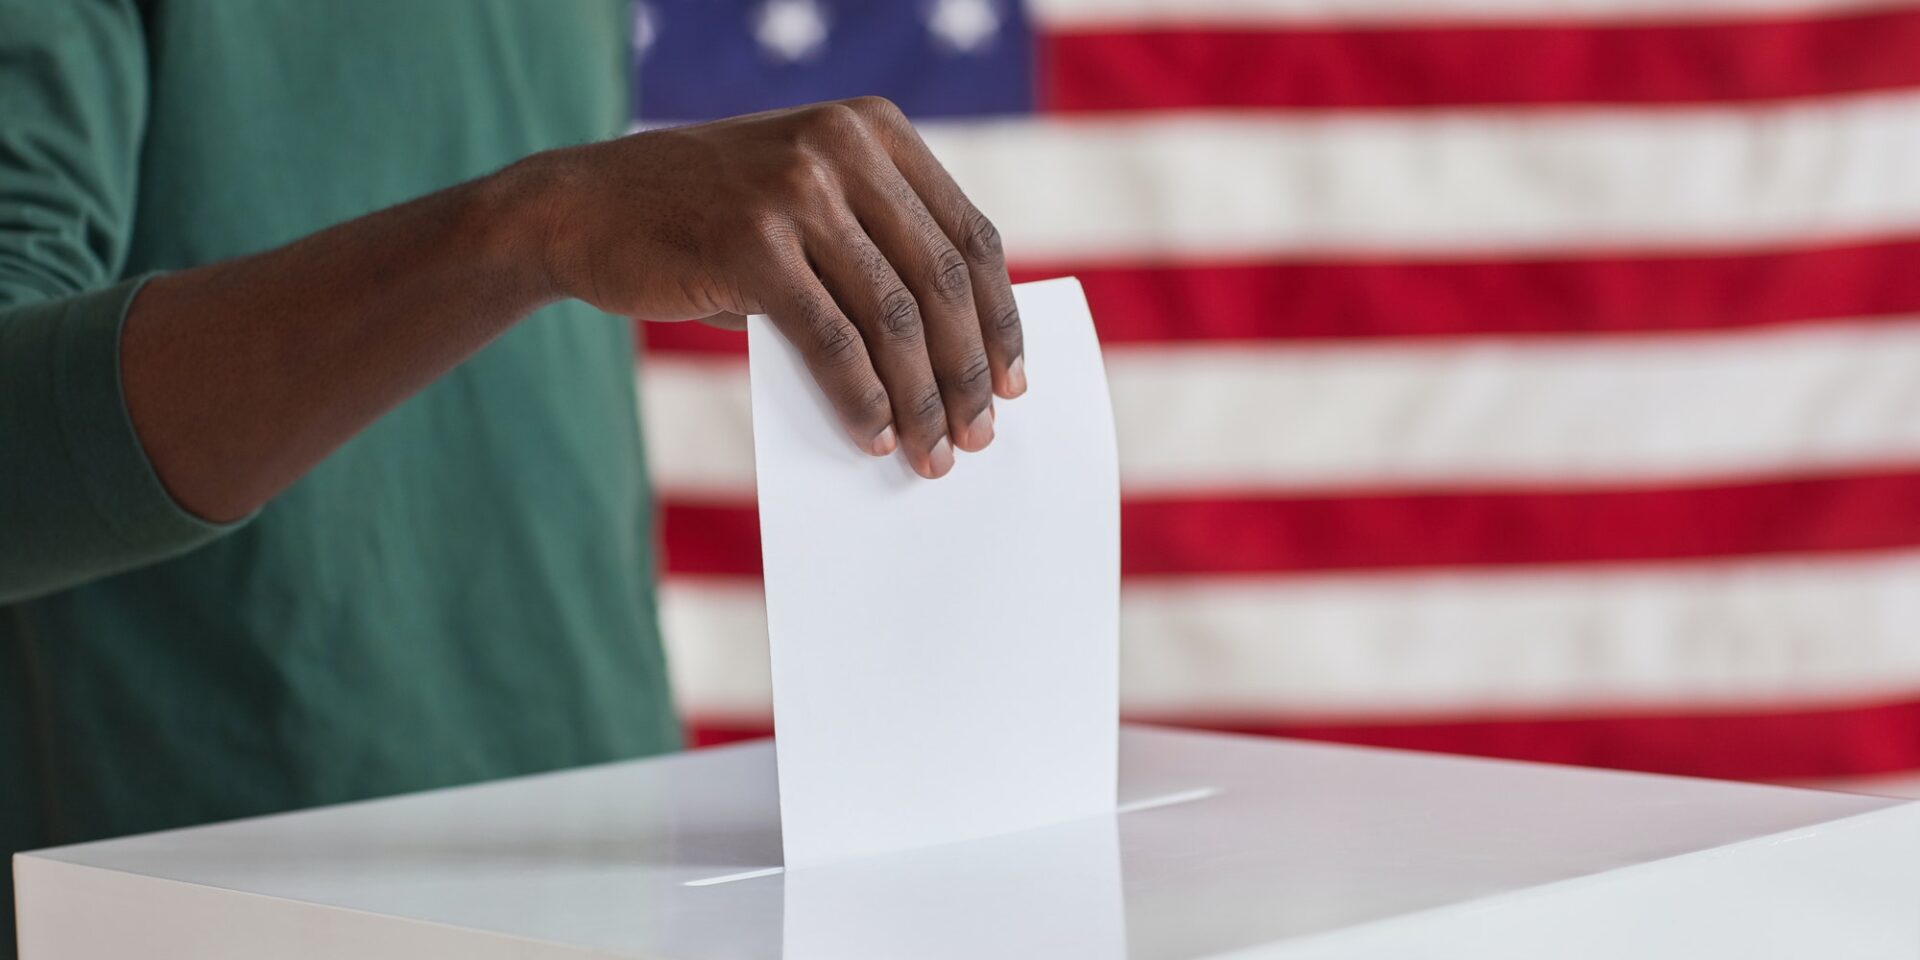 Putting ballot in the box